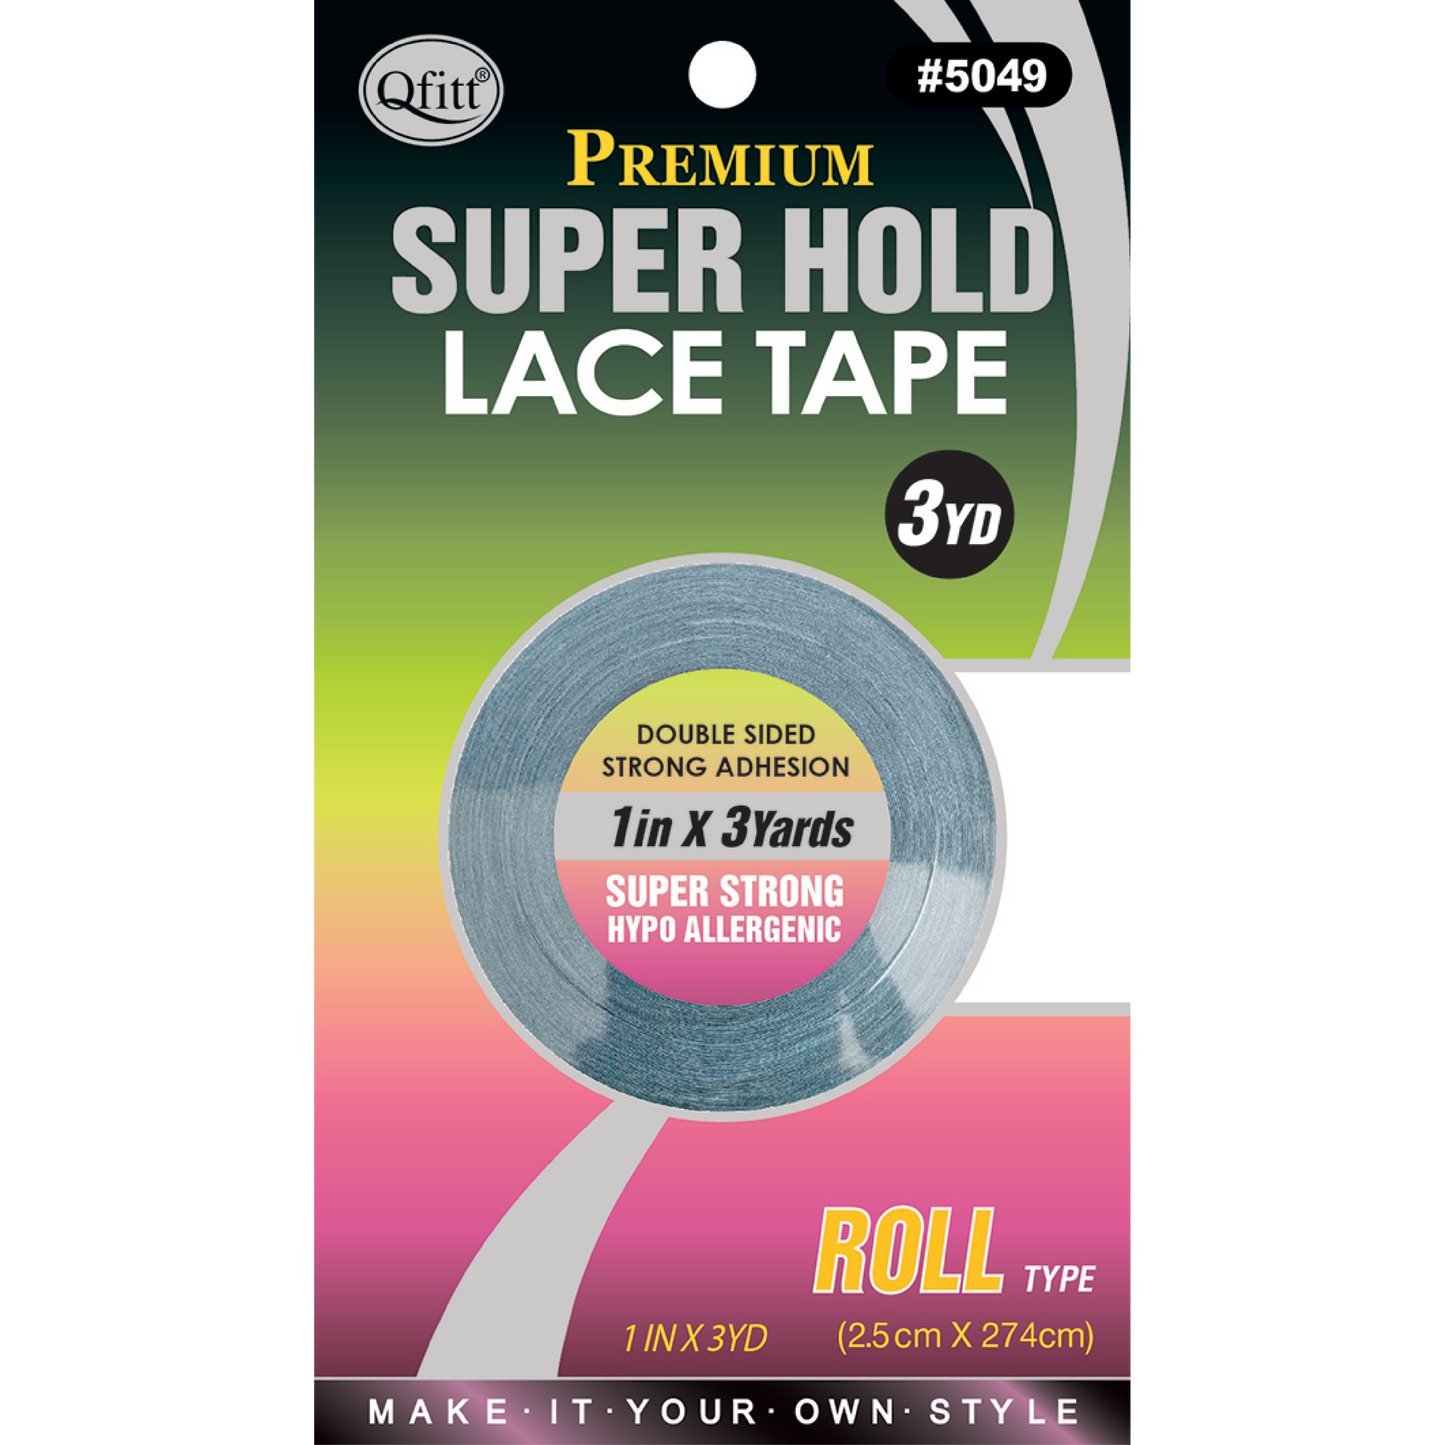 SUPER HOLD LACE TAPE - ROLL